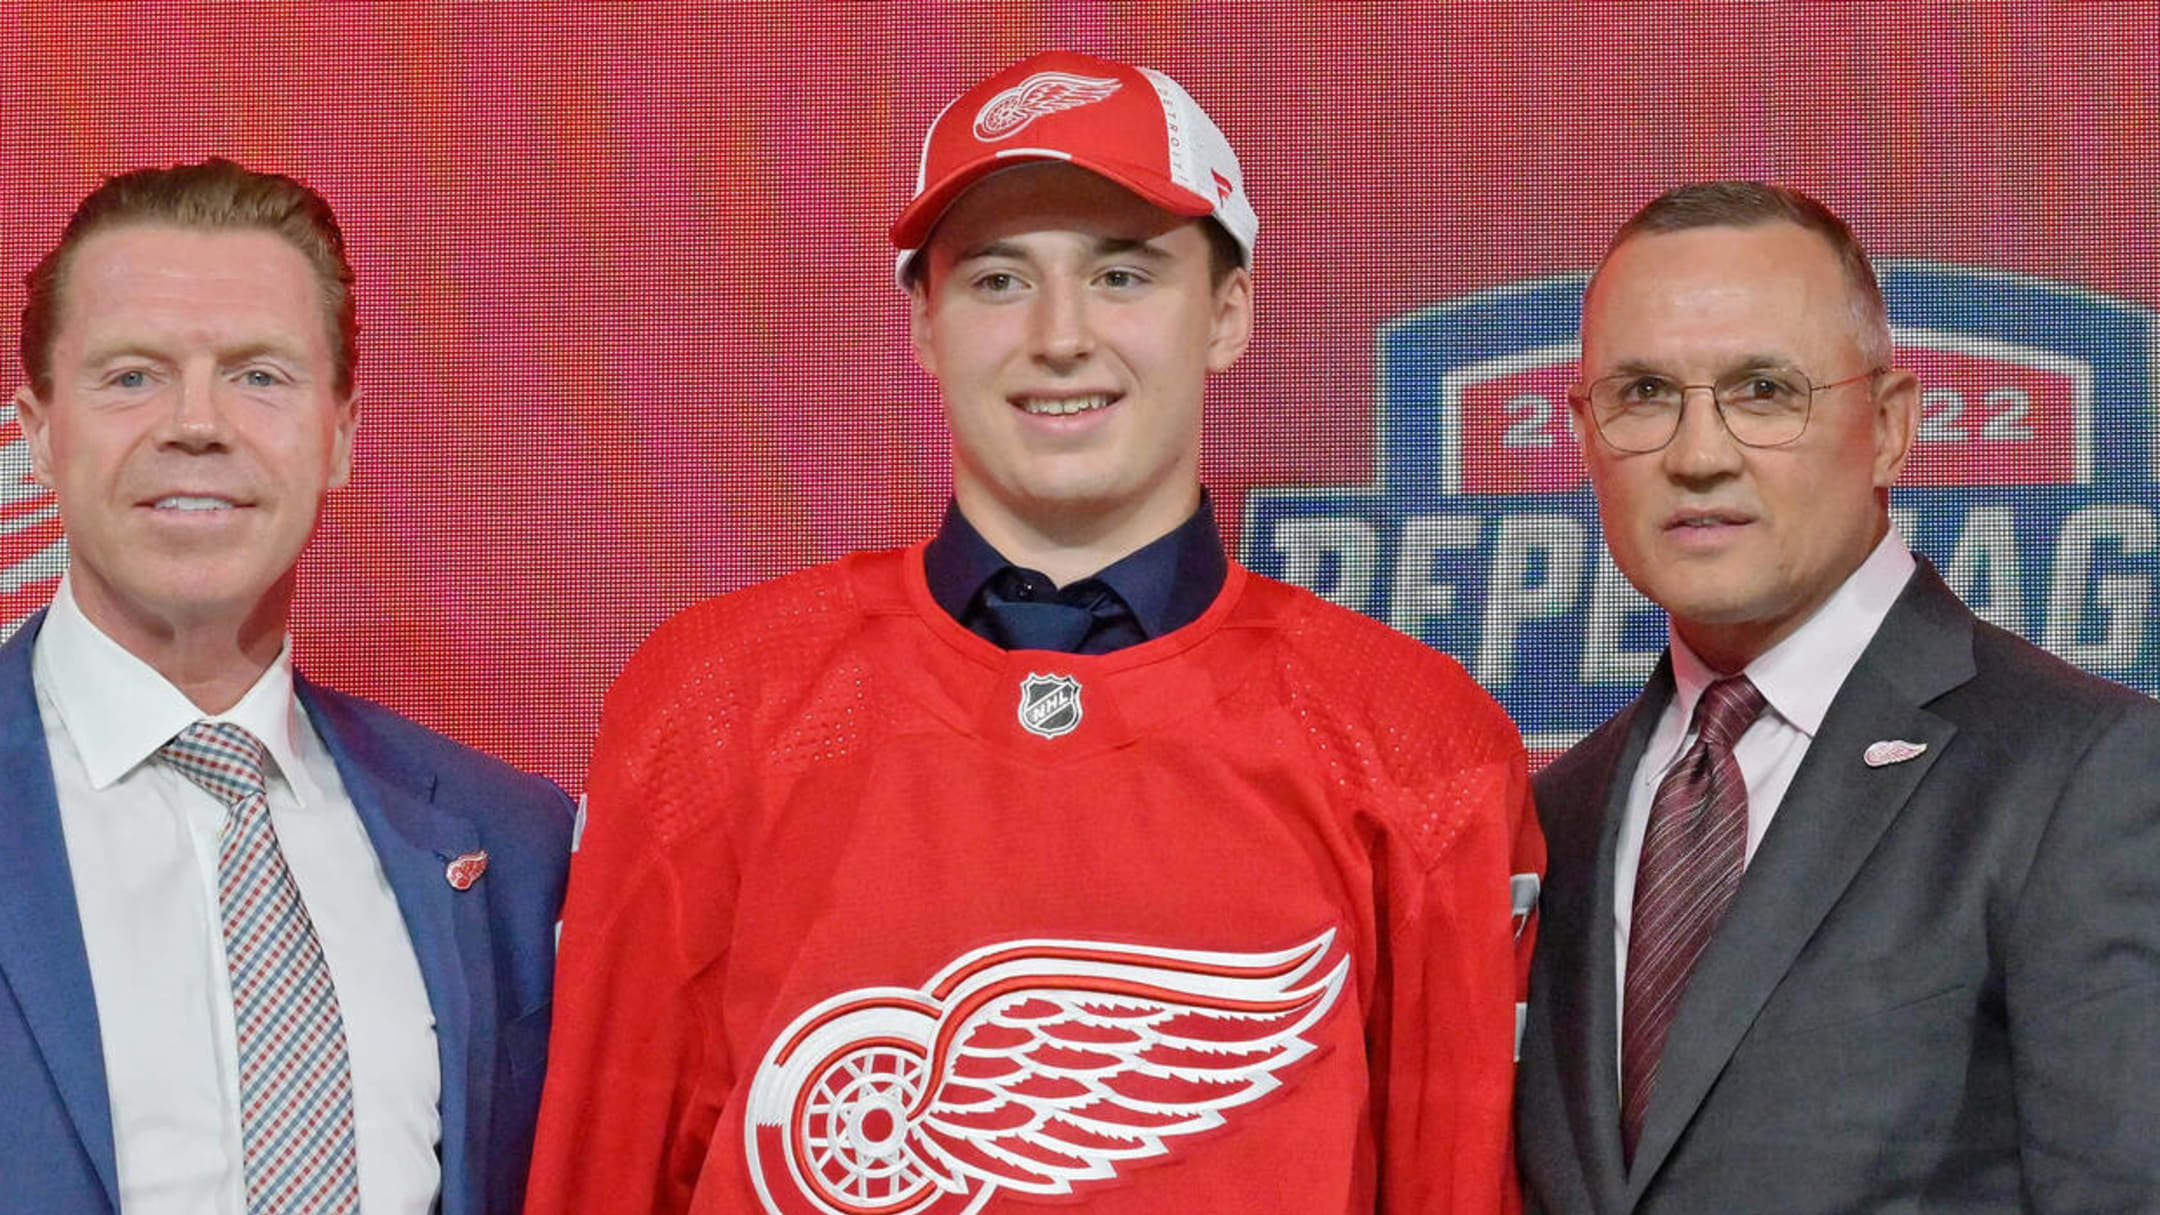 Marco Kasper excited for first NHL Prospect Tournament with Red Wings